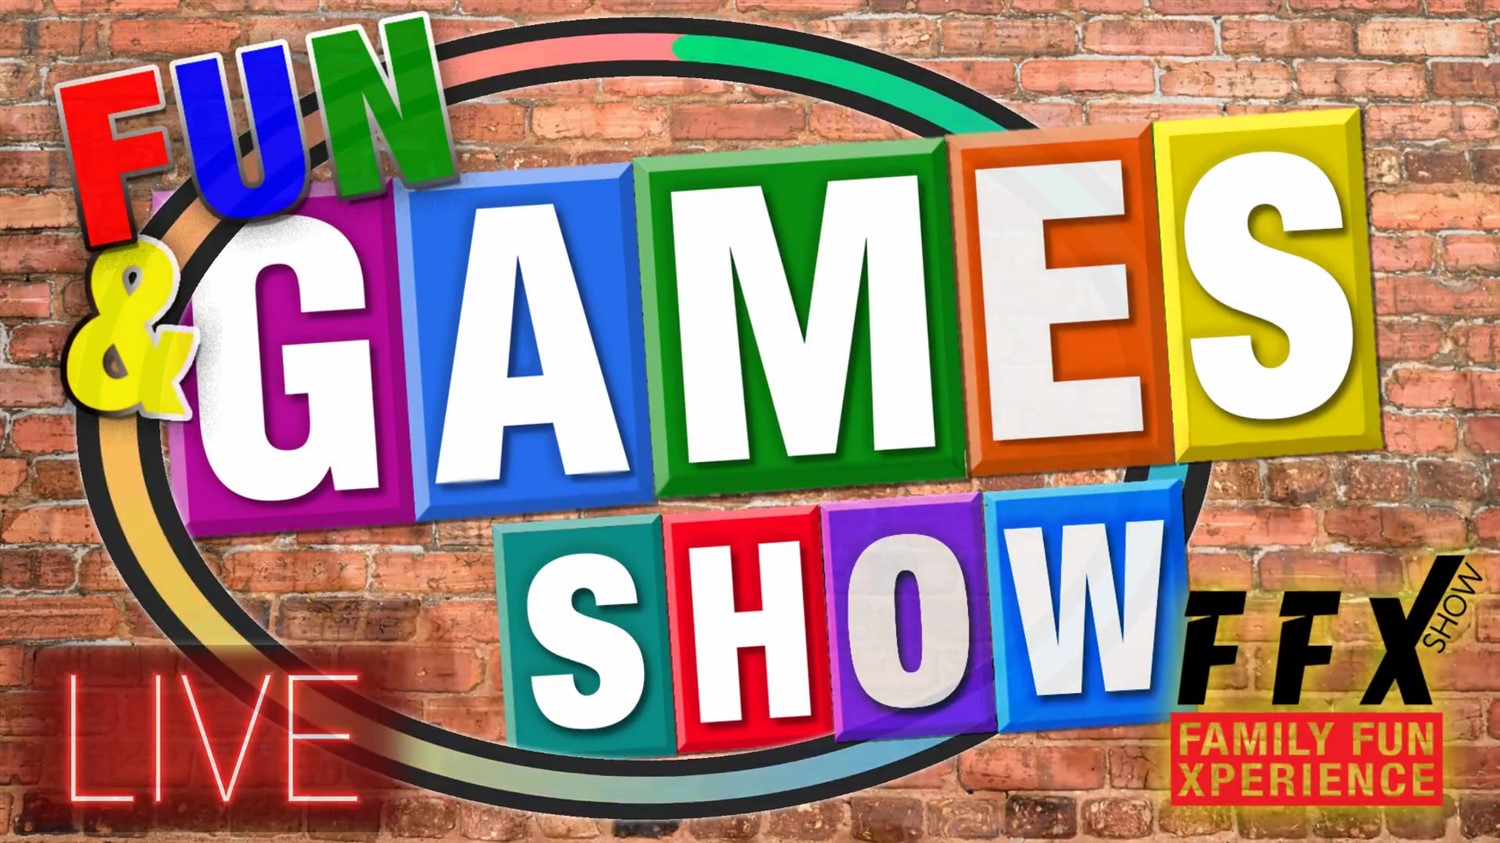 FUN & GAMES SHOW! 5 Star Fun for the whole family! on Aug 30, 19:00@FFX Theatre - Pick a seat, Buy tickets and Get information on Family Fun Xperience tickets.ffxshow.org